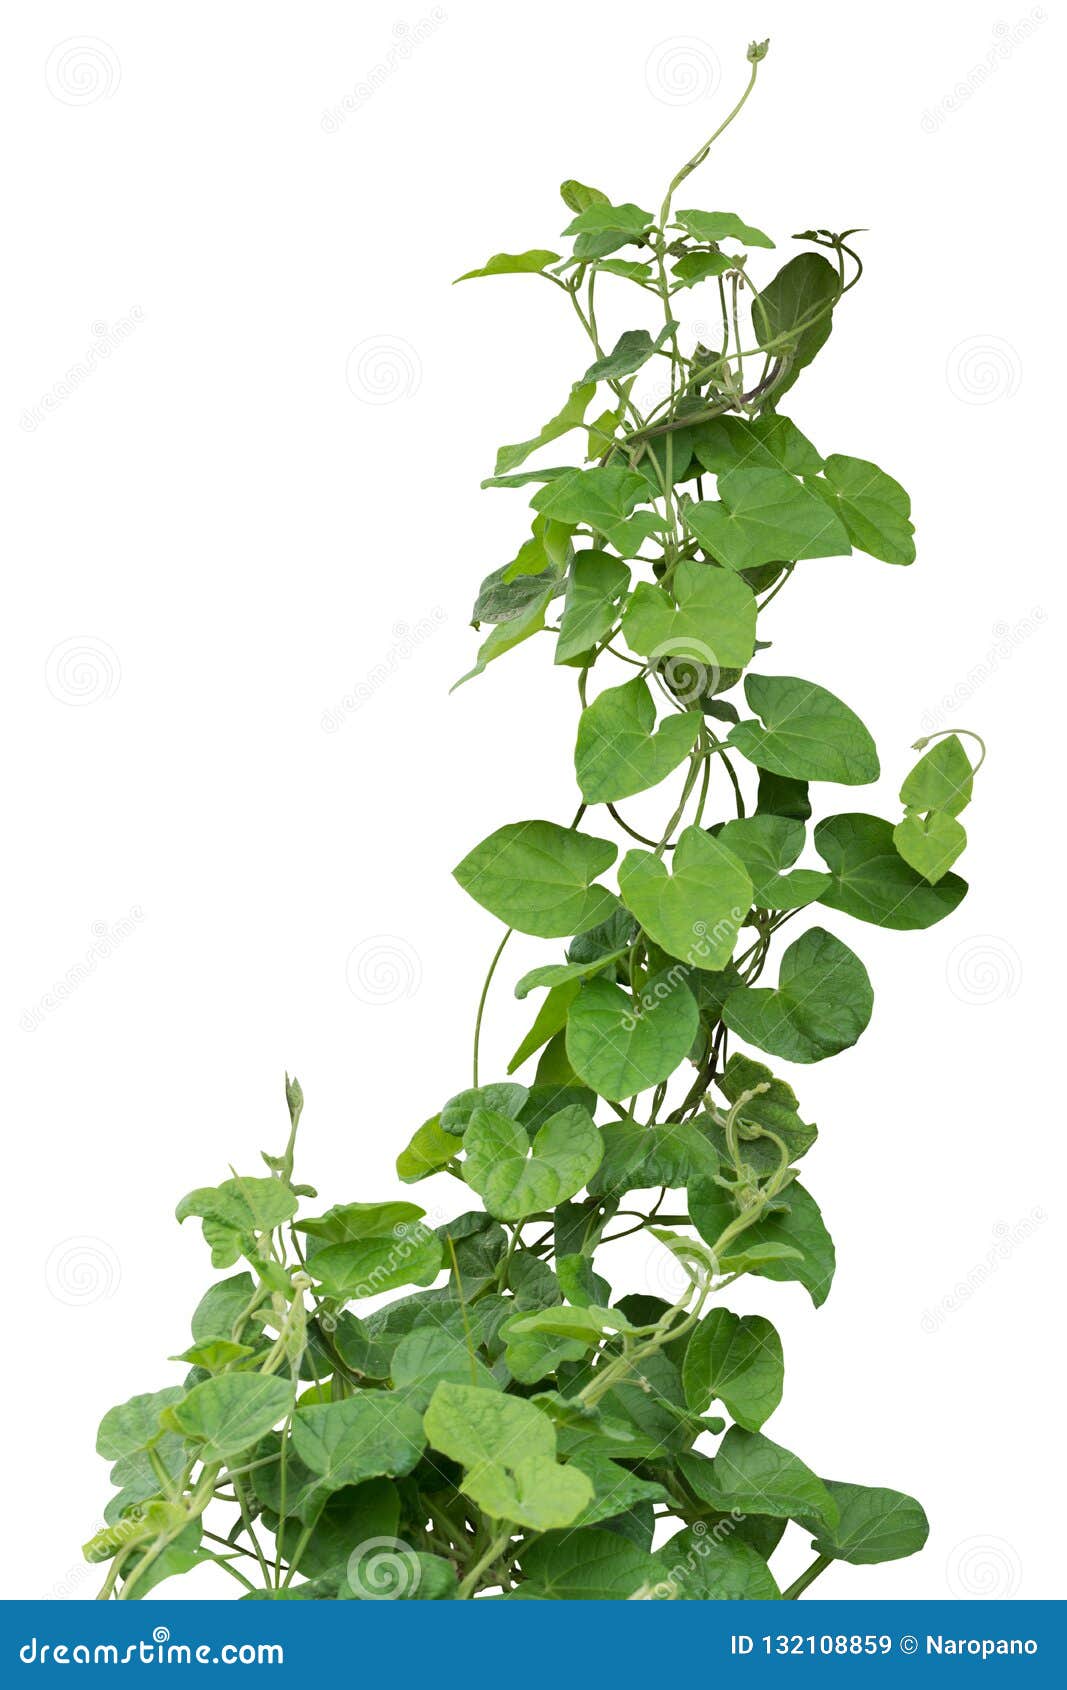 ivy. vine plants, ivy leaves of the climbing plant isolated on w